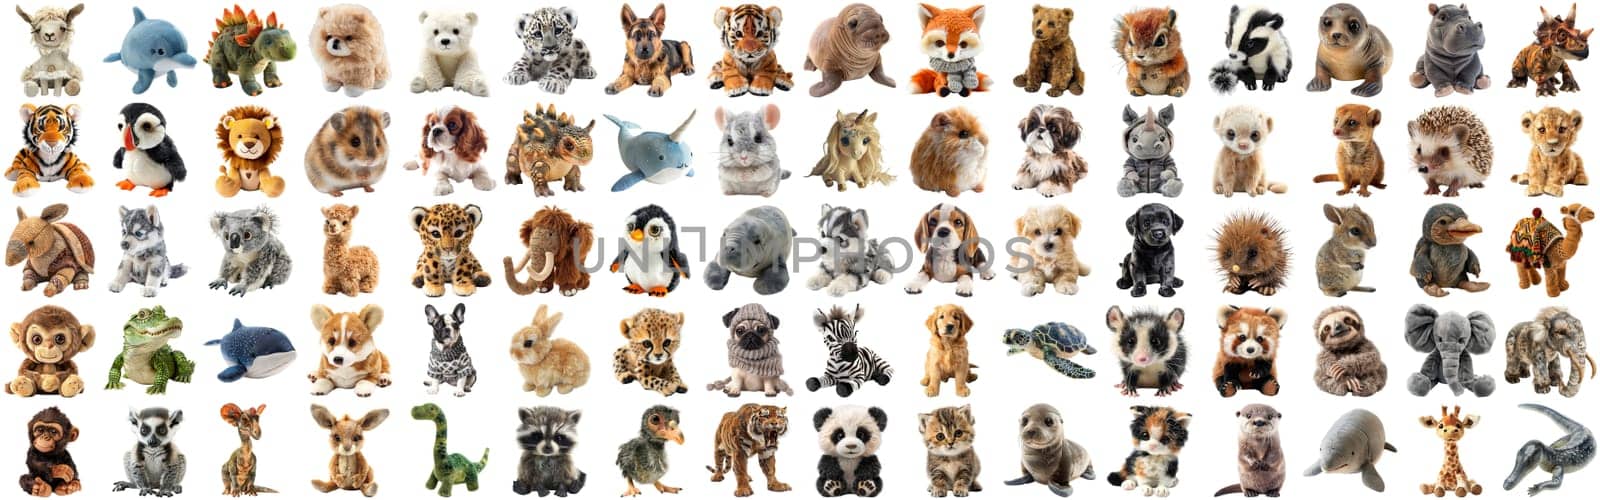 Big set of cute fluffy animal dolls for children toys, isolated background AIG44 by biancoblue